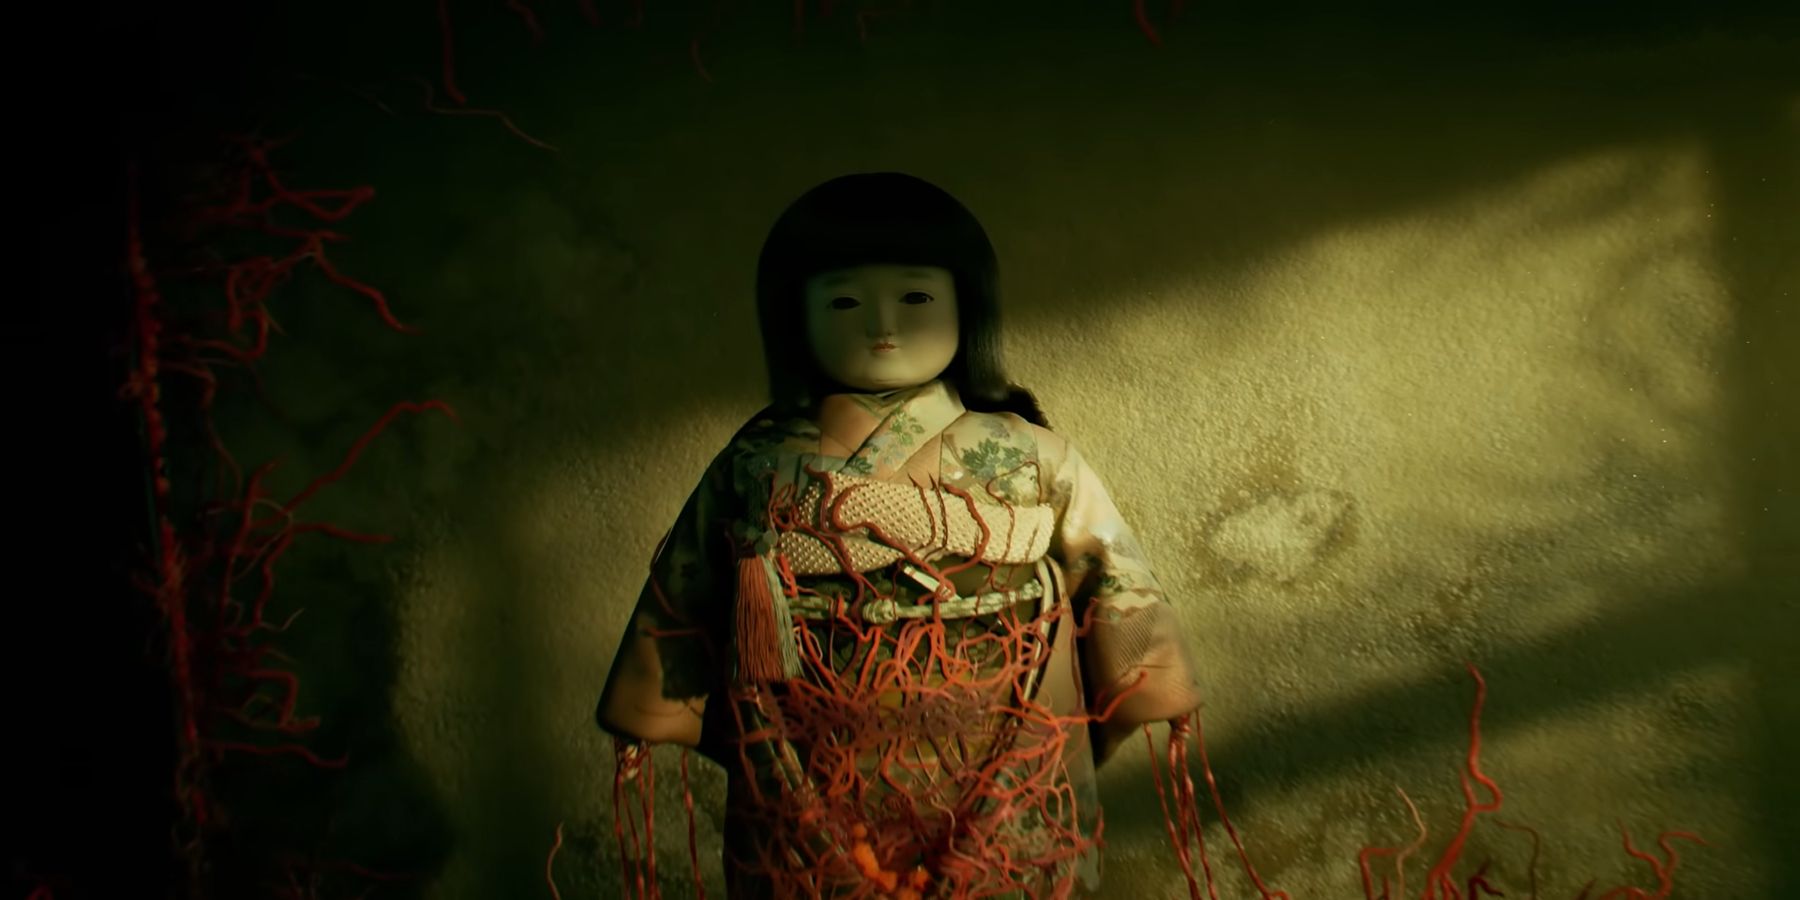 Silent Hill f's Geisha doll being overrun by creeping plant-like vines.